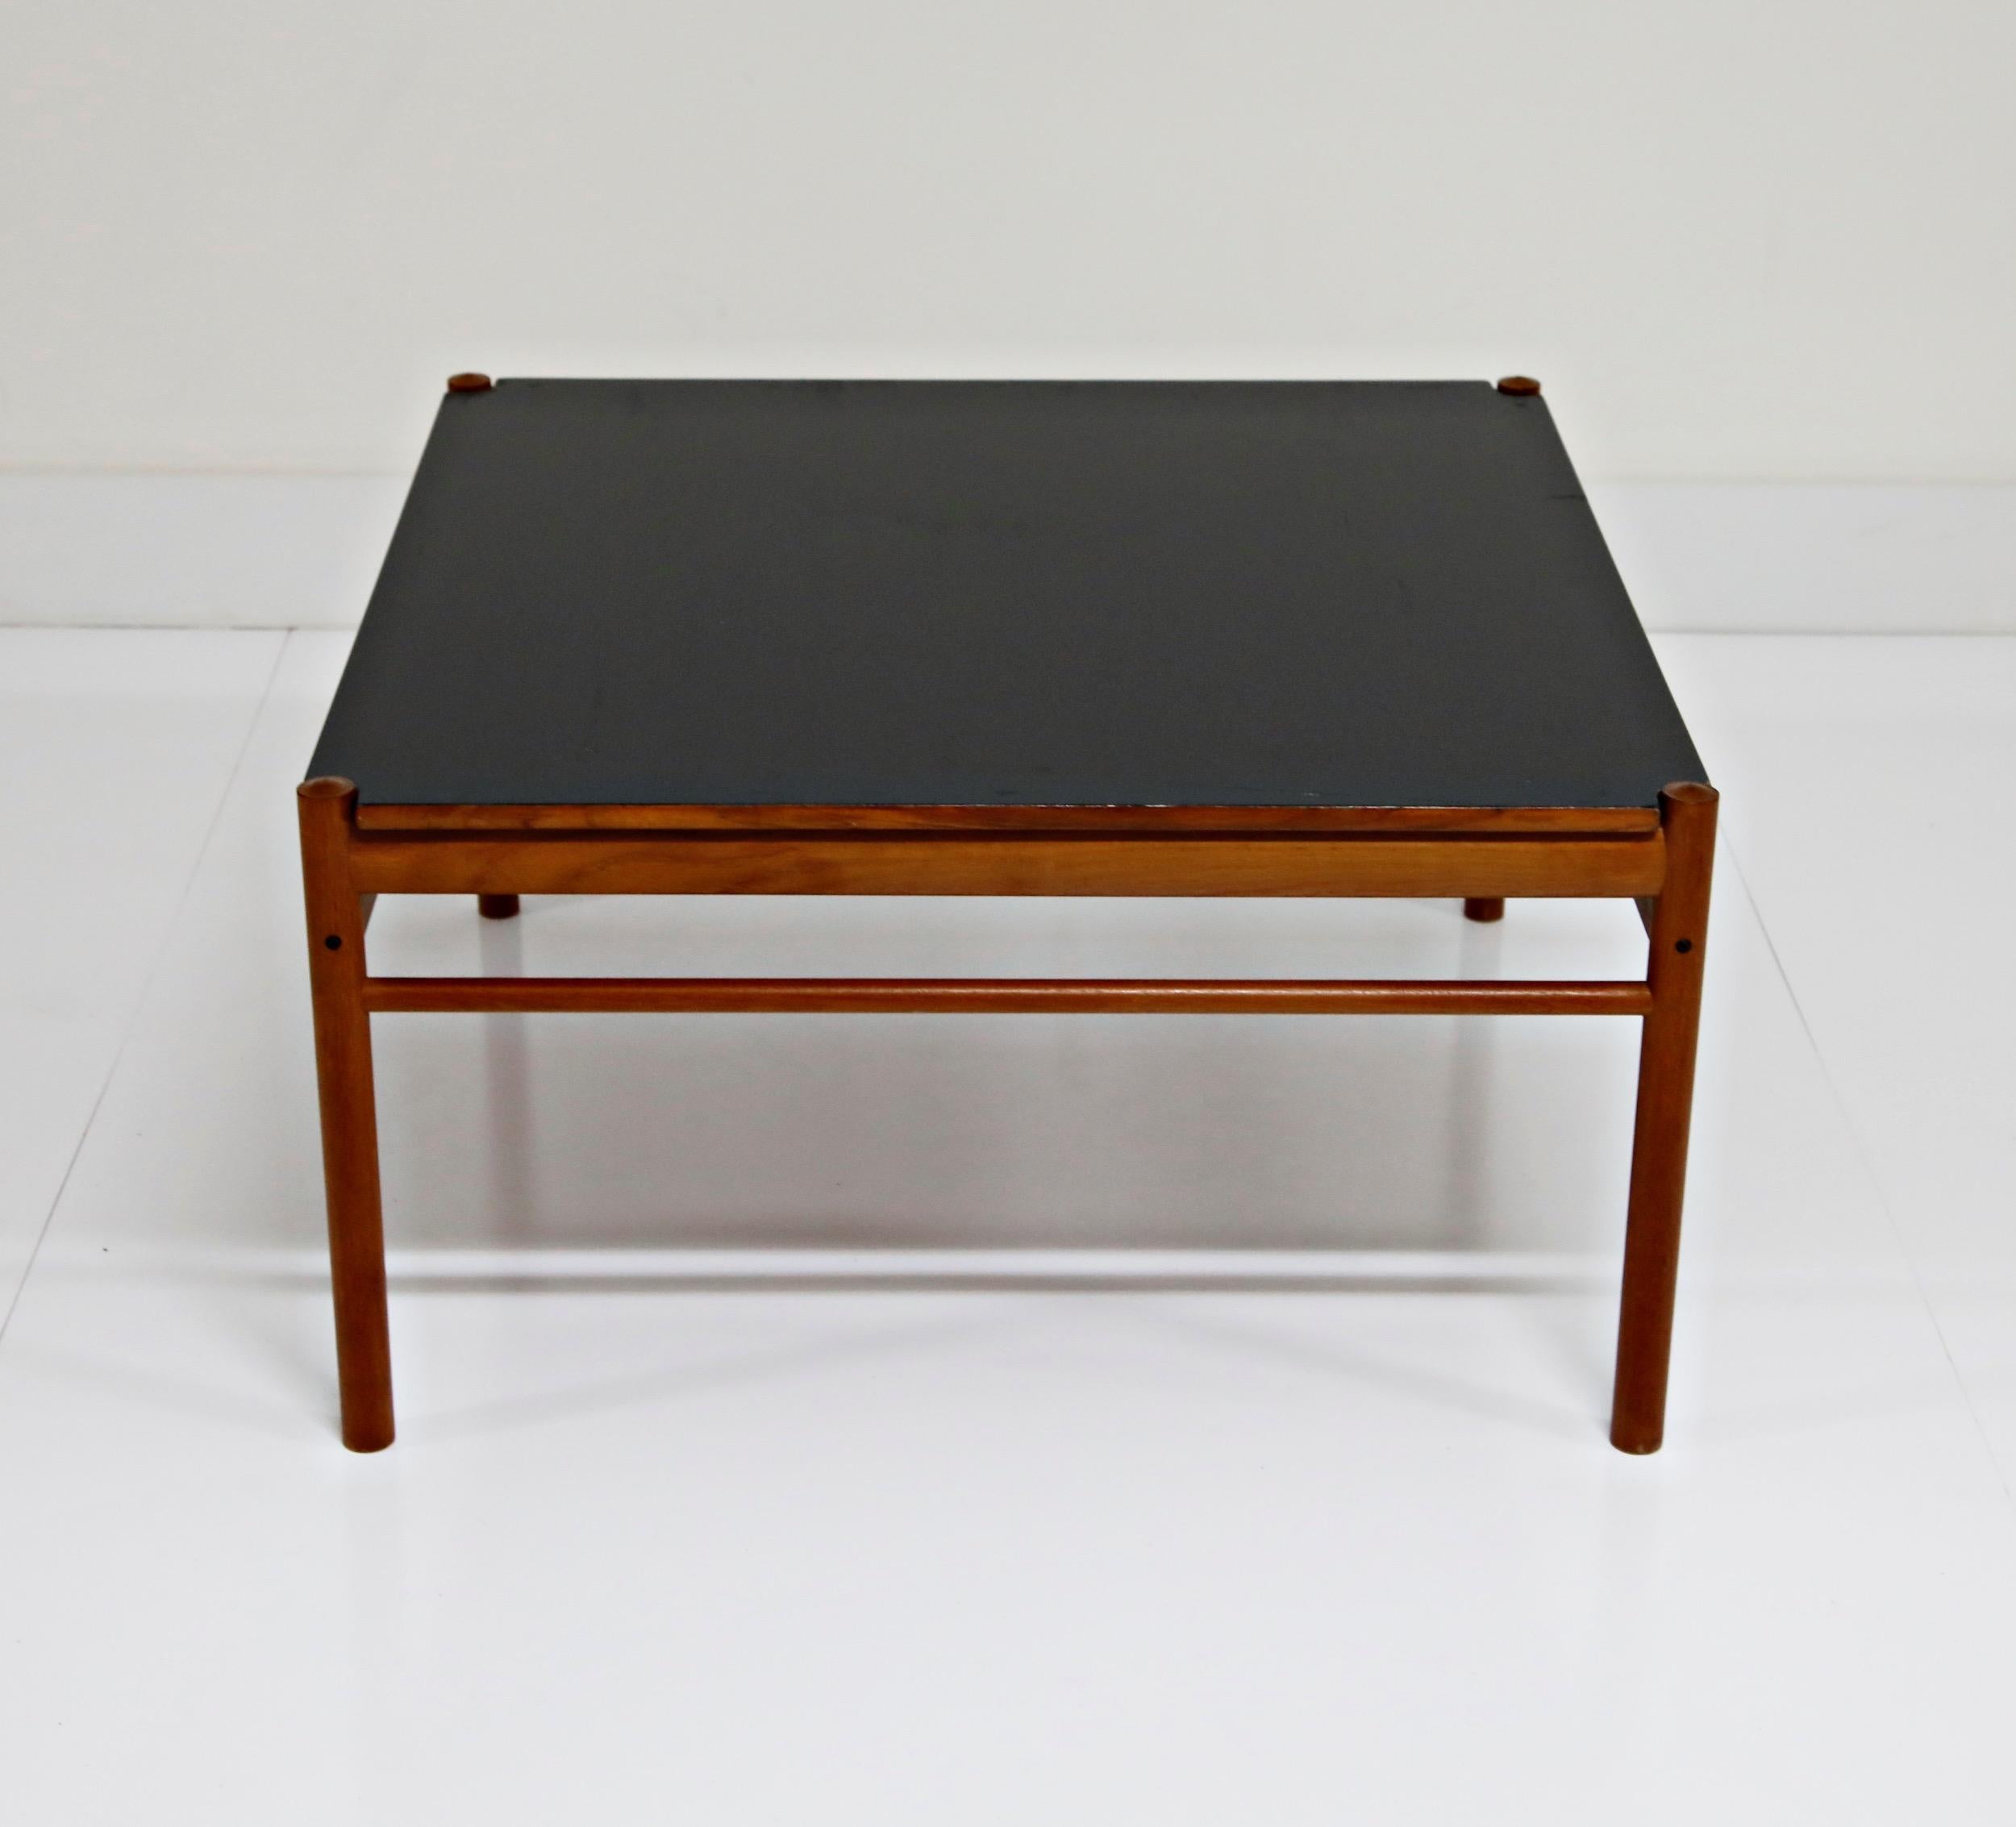 A classic 1960s reversible coffee table by Ole Wanscher for Poul Jeppesen, which can also be used as an end table, side table or occasional table. Also, with the clever use of Formica for one side of the tabletop, consider using in a kids room -